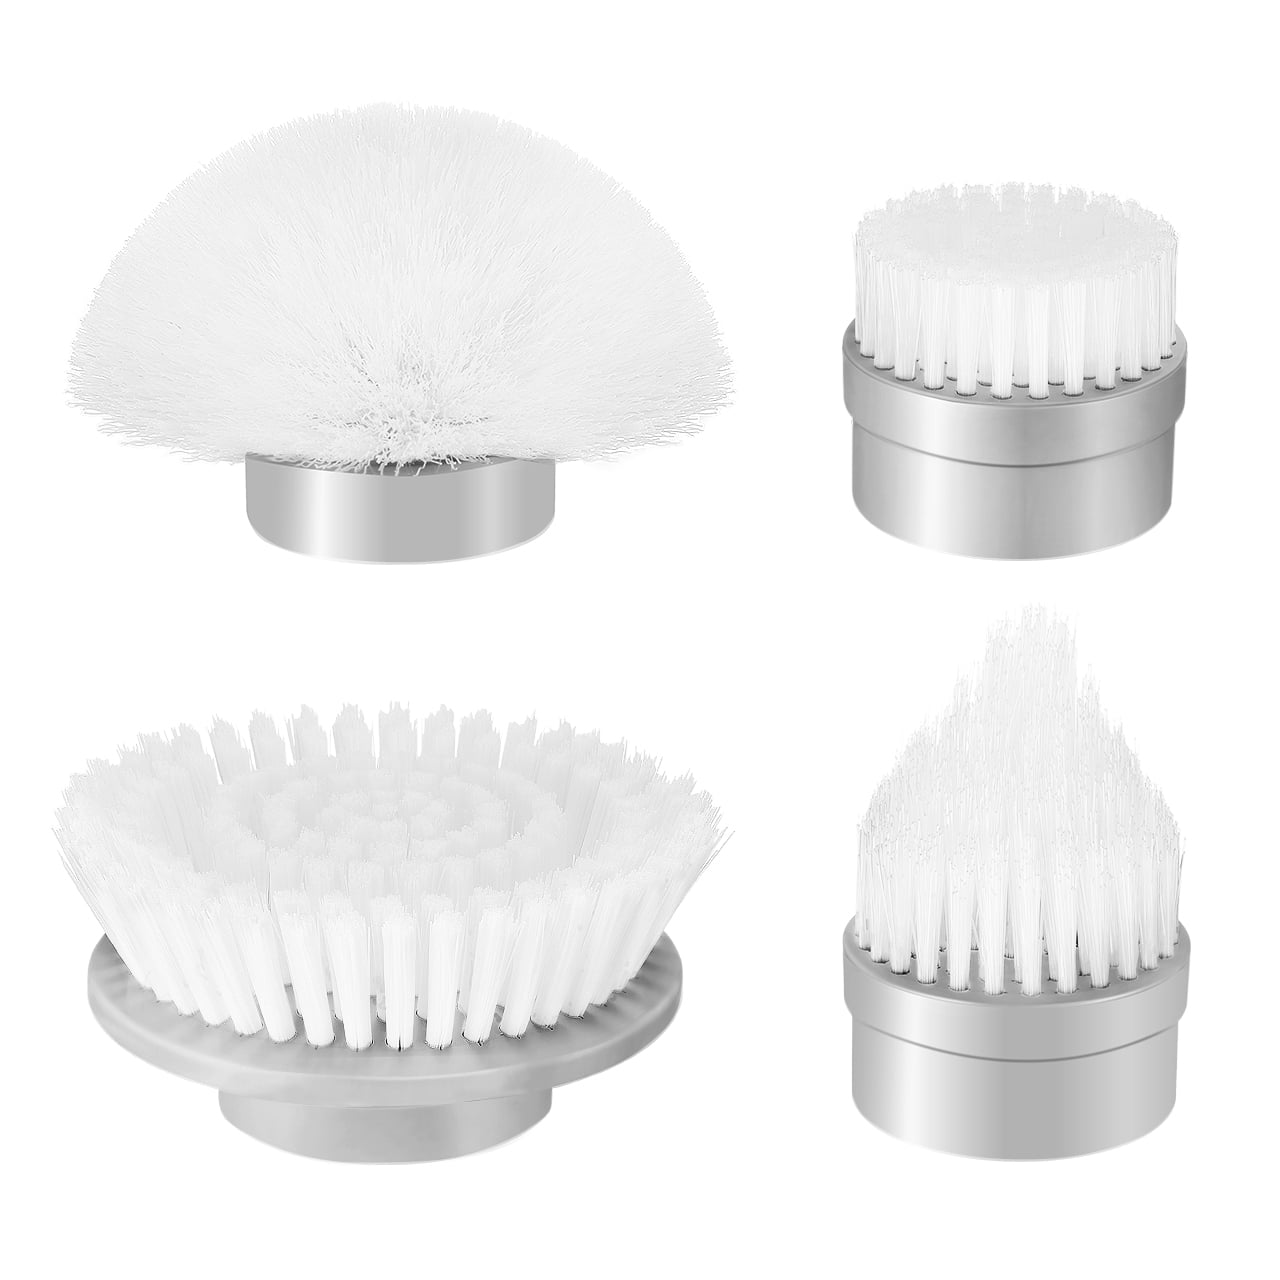 InnOrca Electric Spin Scrubber 2023 New Cordless Power Cleaning Brush with  7 Replacement Brush Heads, Shower Cleaning Brush with Extension Arm for